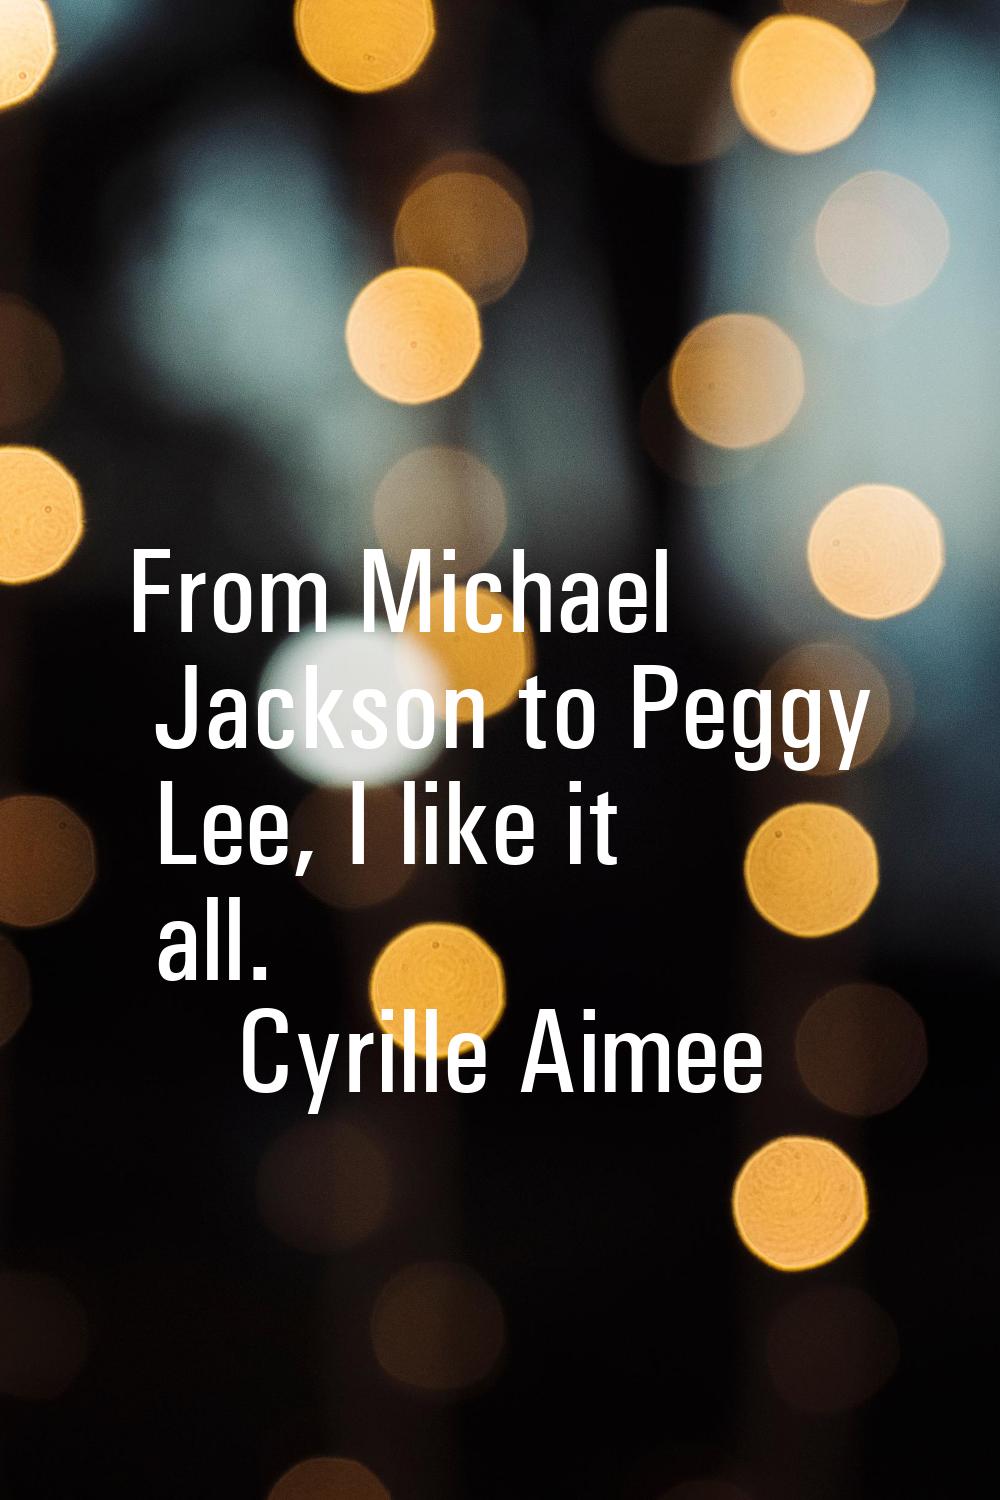 From Michael Jackson to Peggy Lee, I like it all.